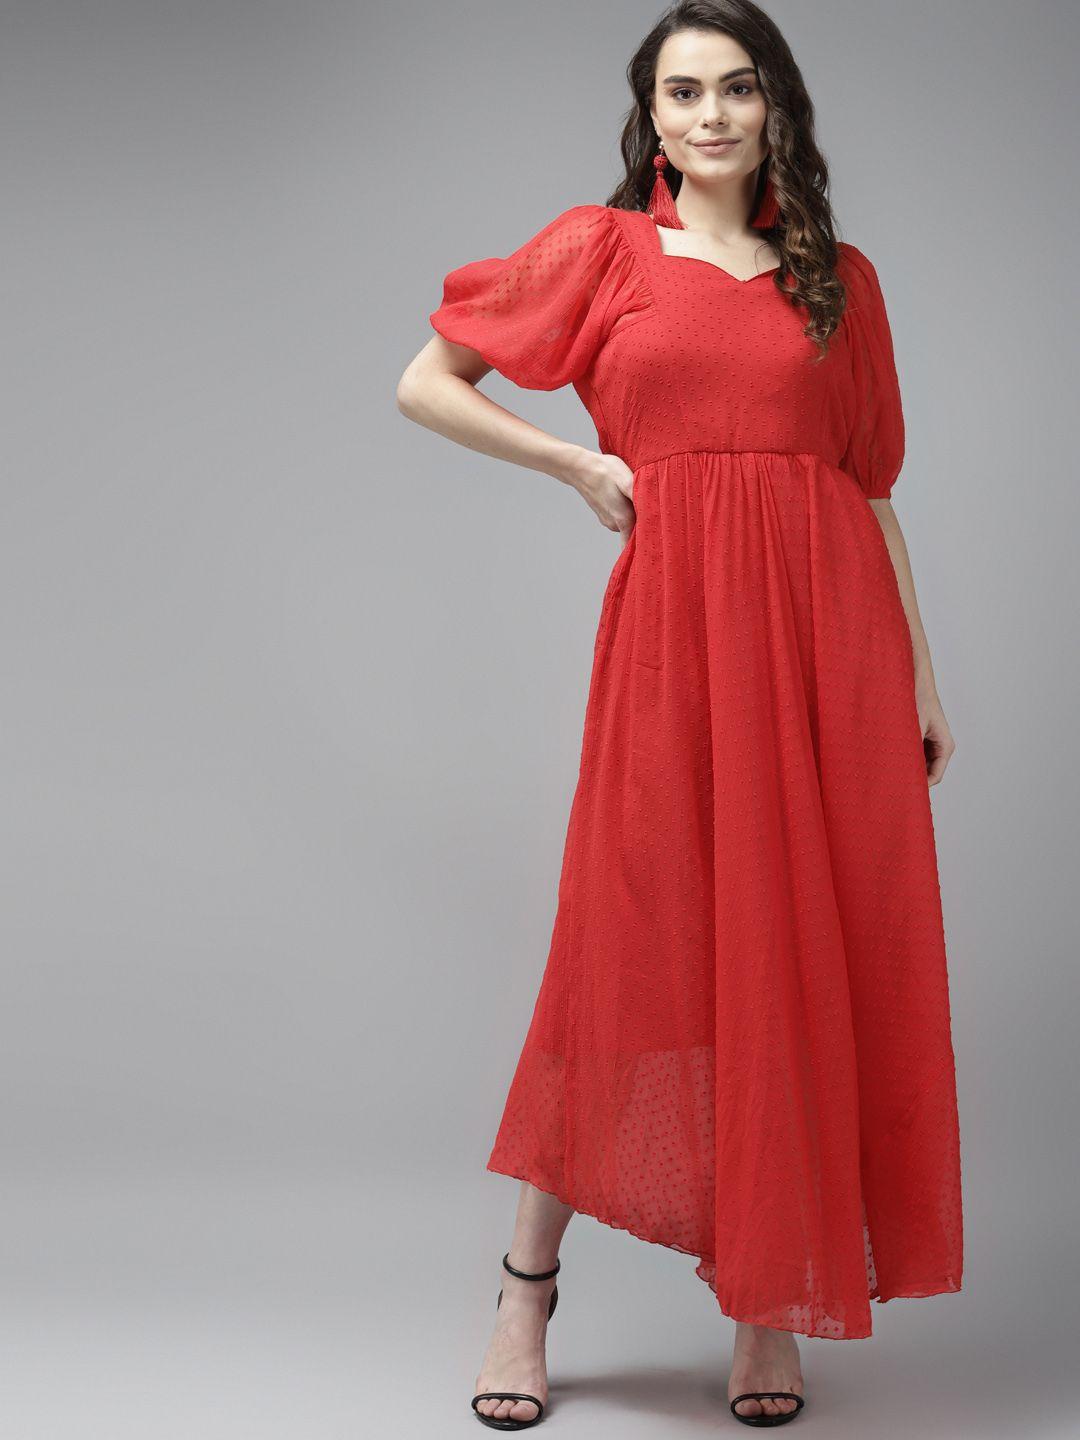 panit red georgette maxi dress